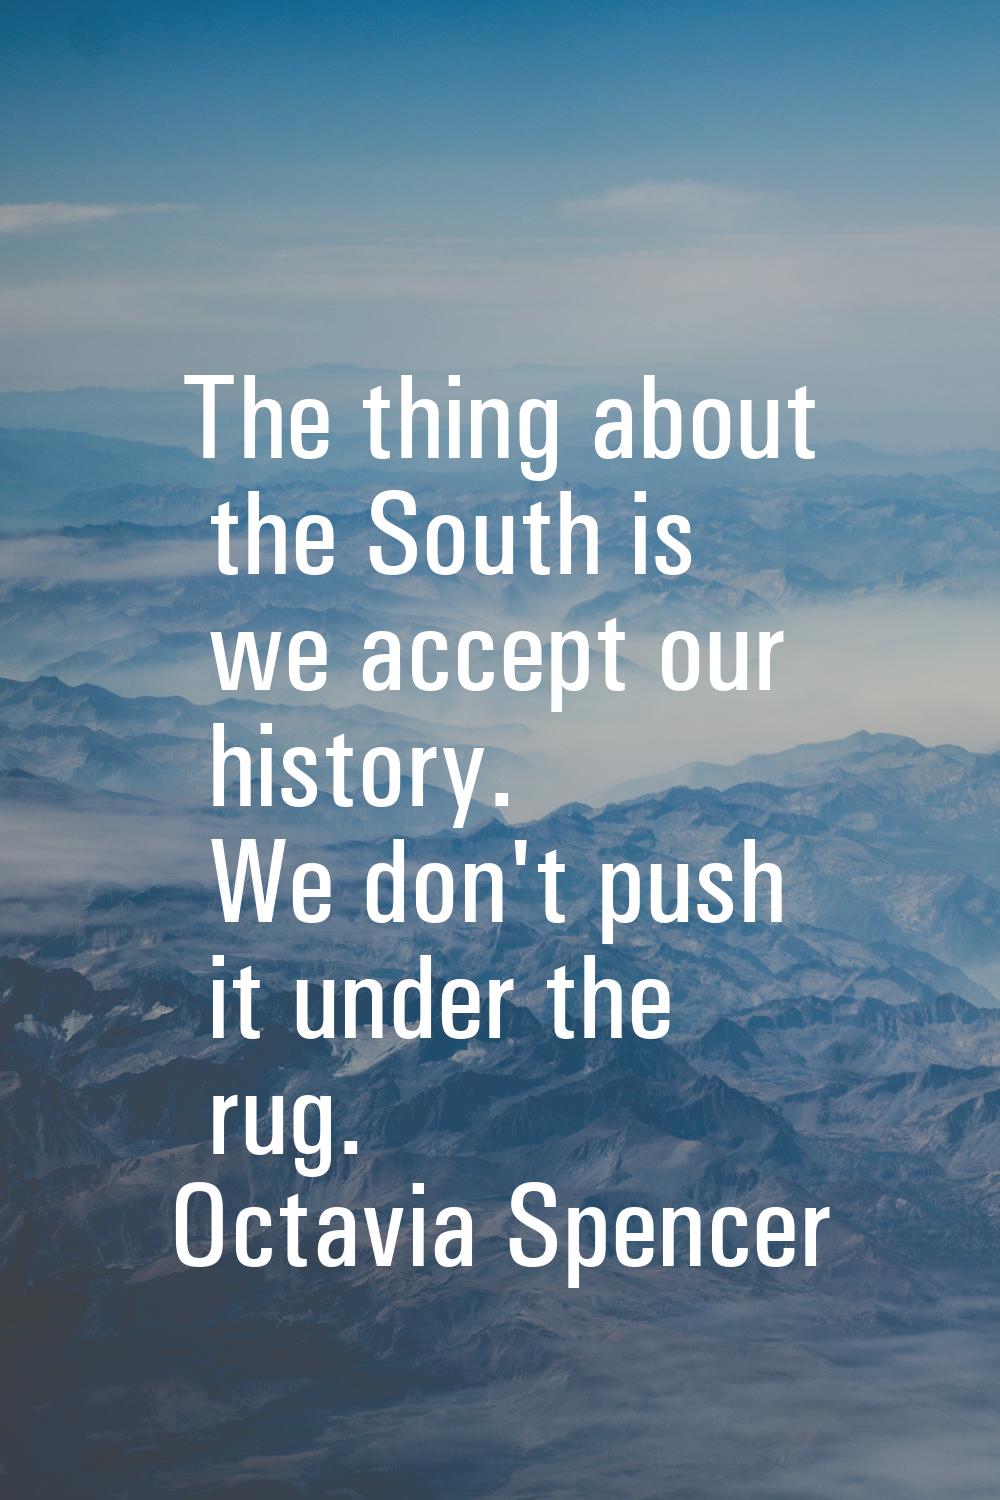 The thing about the South is we accept our history. We don't push it under the rug.